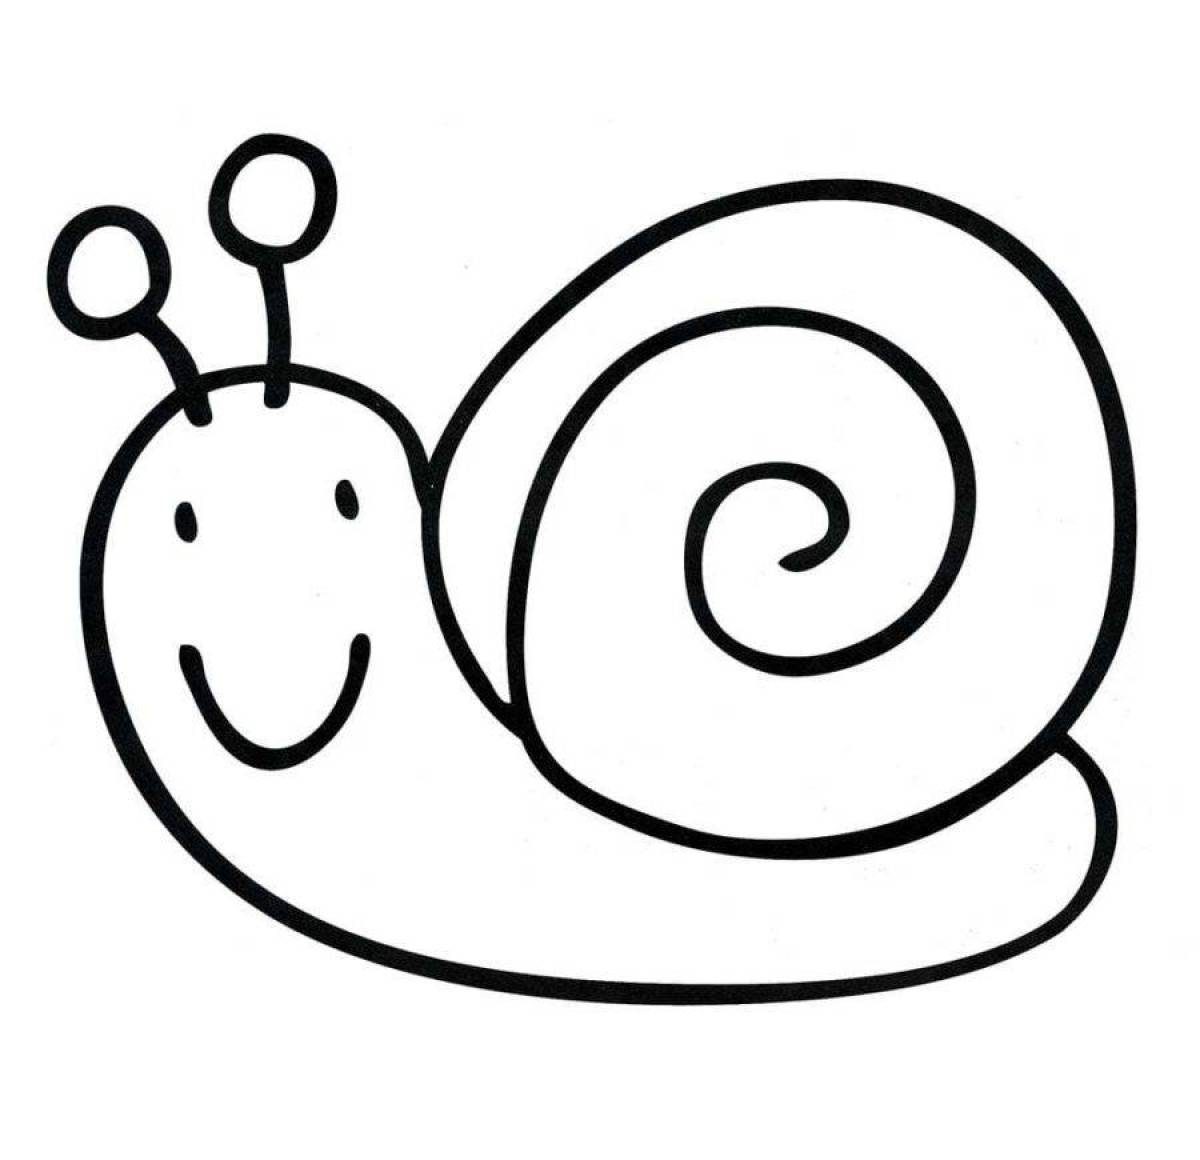 Adorable snail coloring book for kids